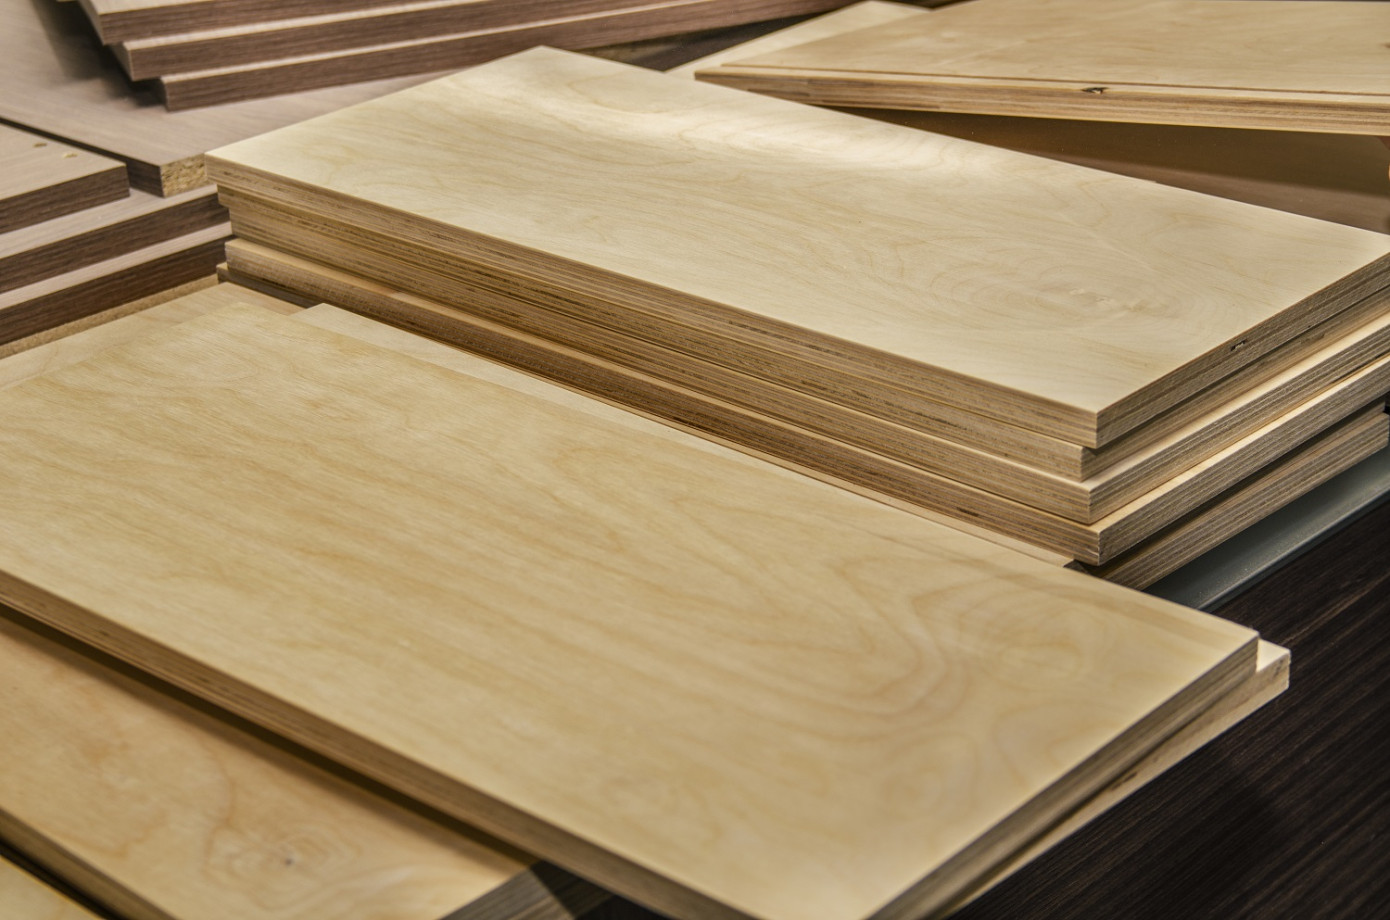 Exports of plywood from Russia to U.S. fall 79% in December